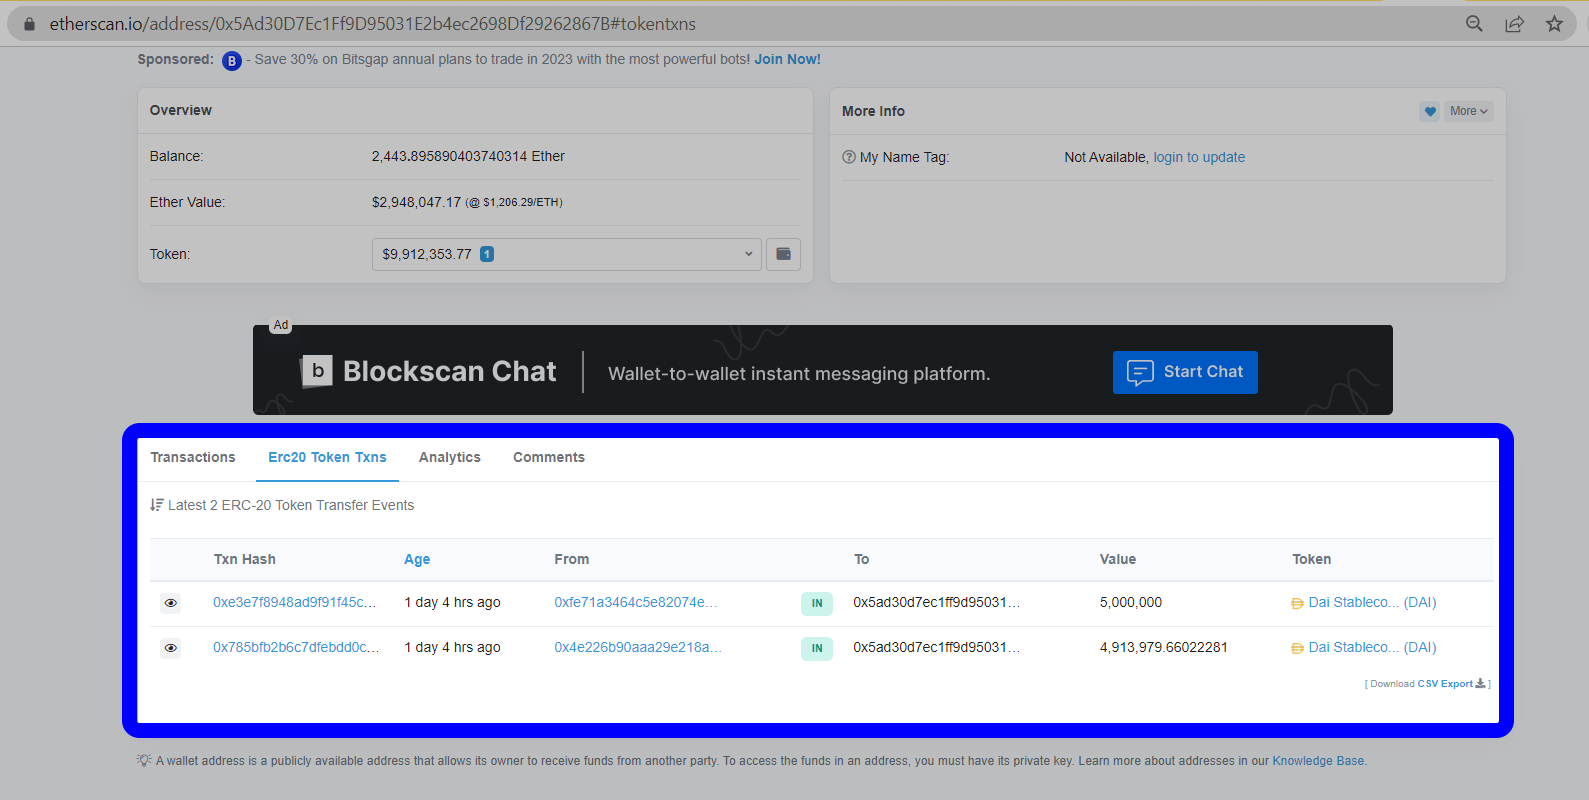 9.9M DAI returned to this address: [https://etherscan.io/address/0x5Ad30D7Ec1Ff9D95031E2b4ec2698Df29262867B#tokentxns](https://etherscan.io/address/0x5Ad30D7Ec1Ff9D95031E2b4ec2698Df29262867B#tokentxns)